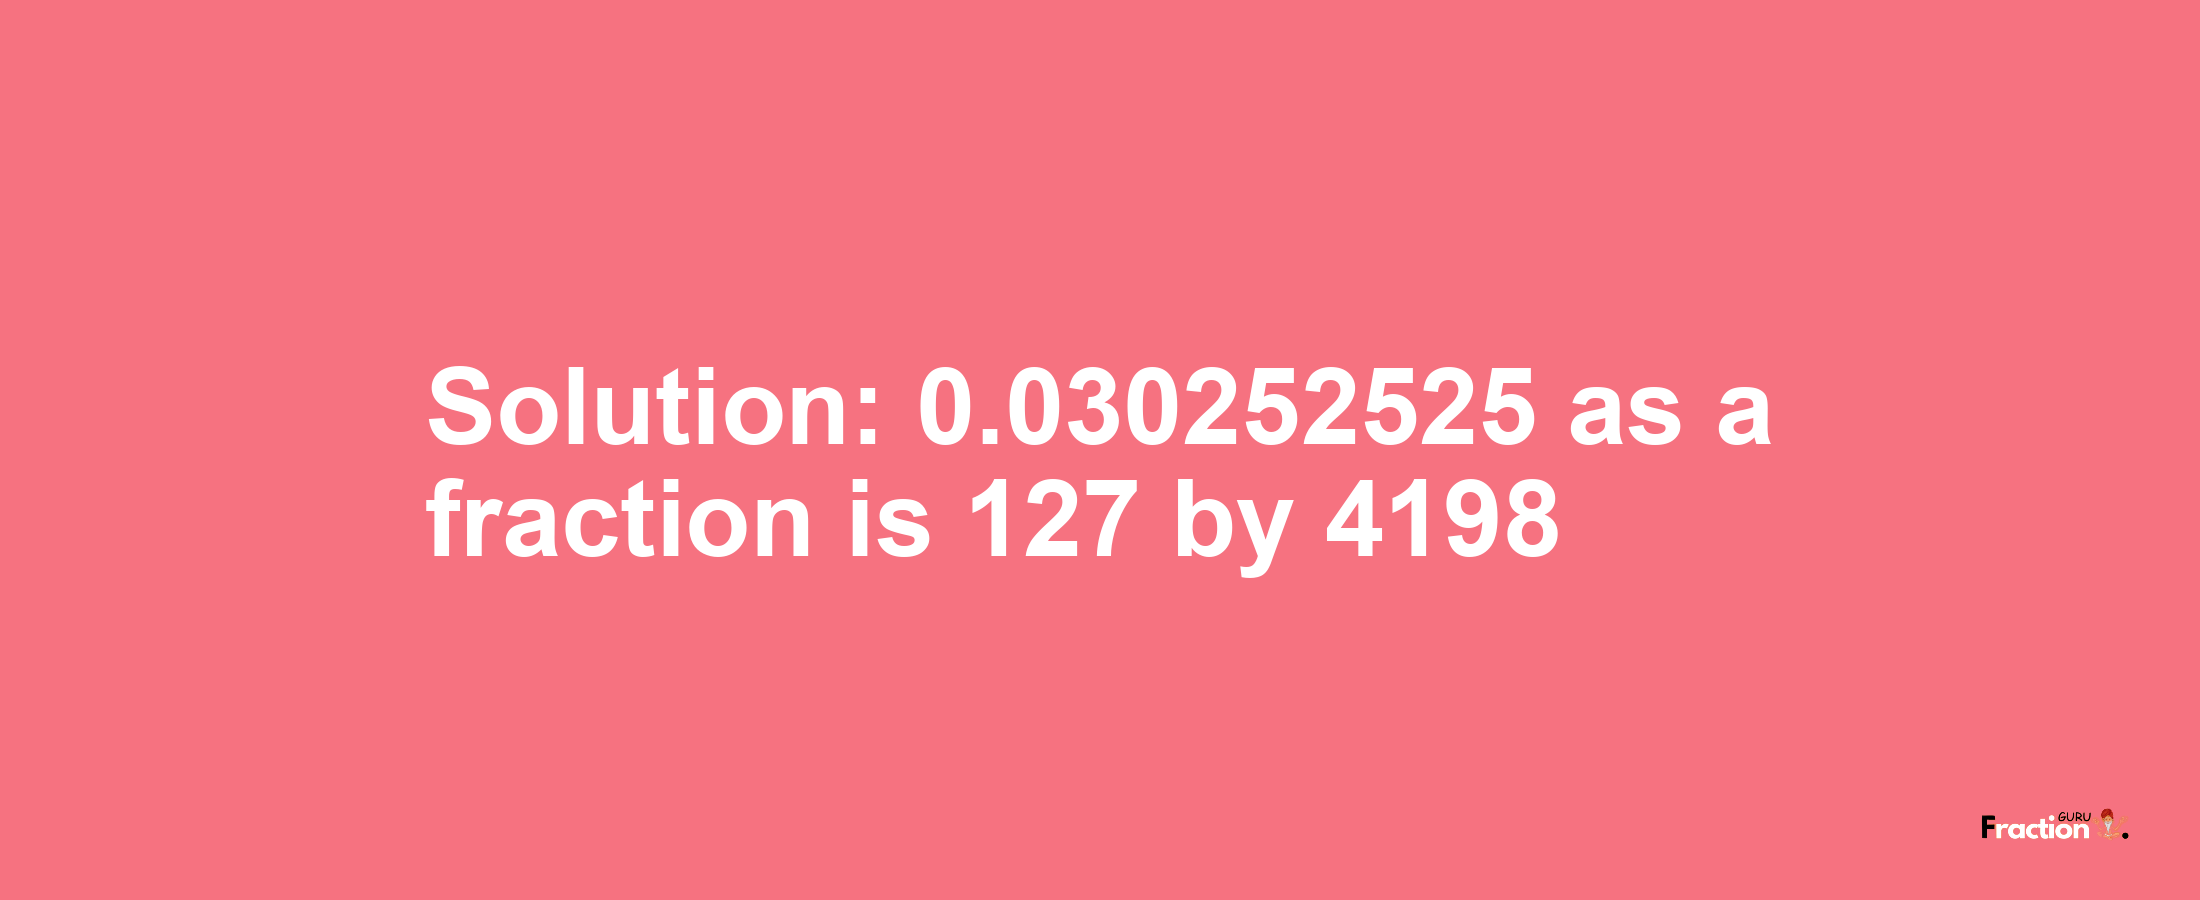 Solution:0.030252525 as a fraction is 127/4198